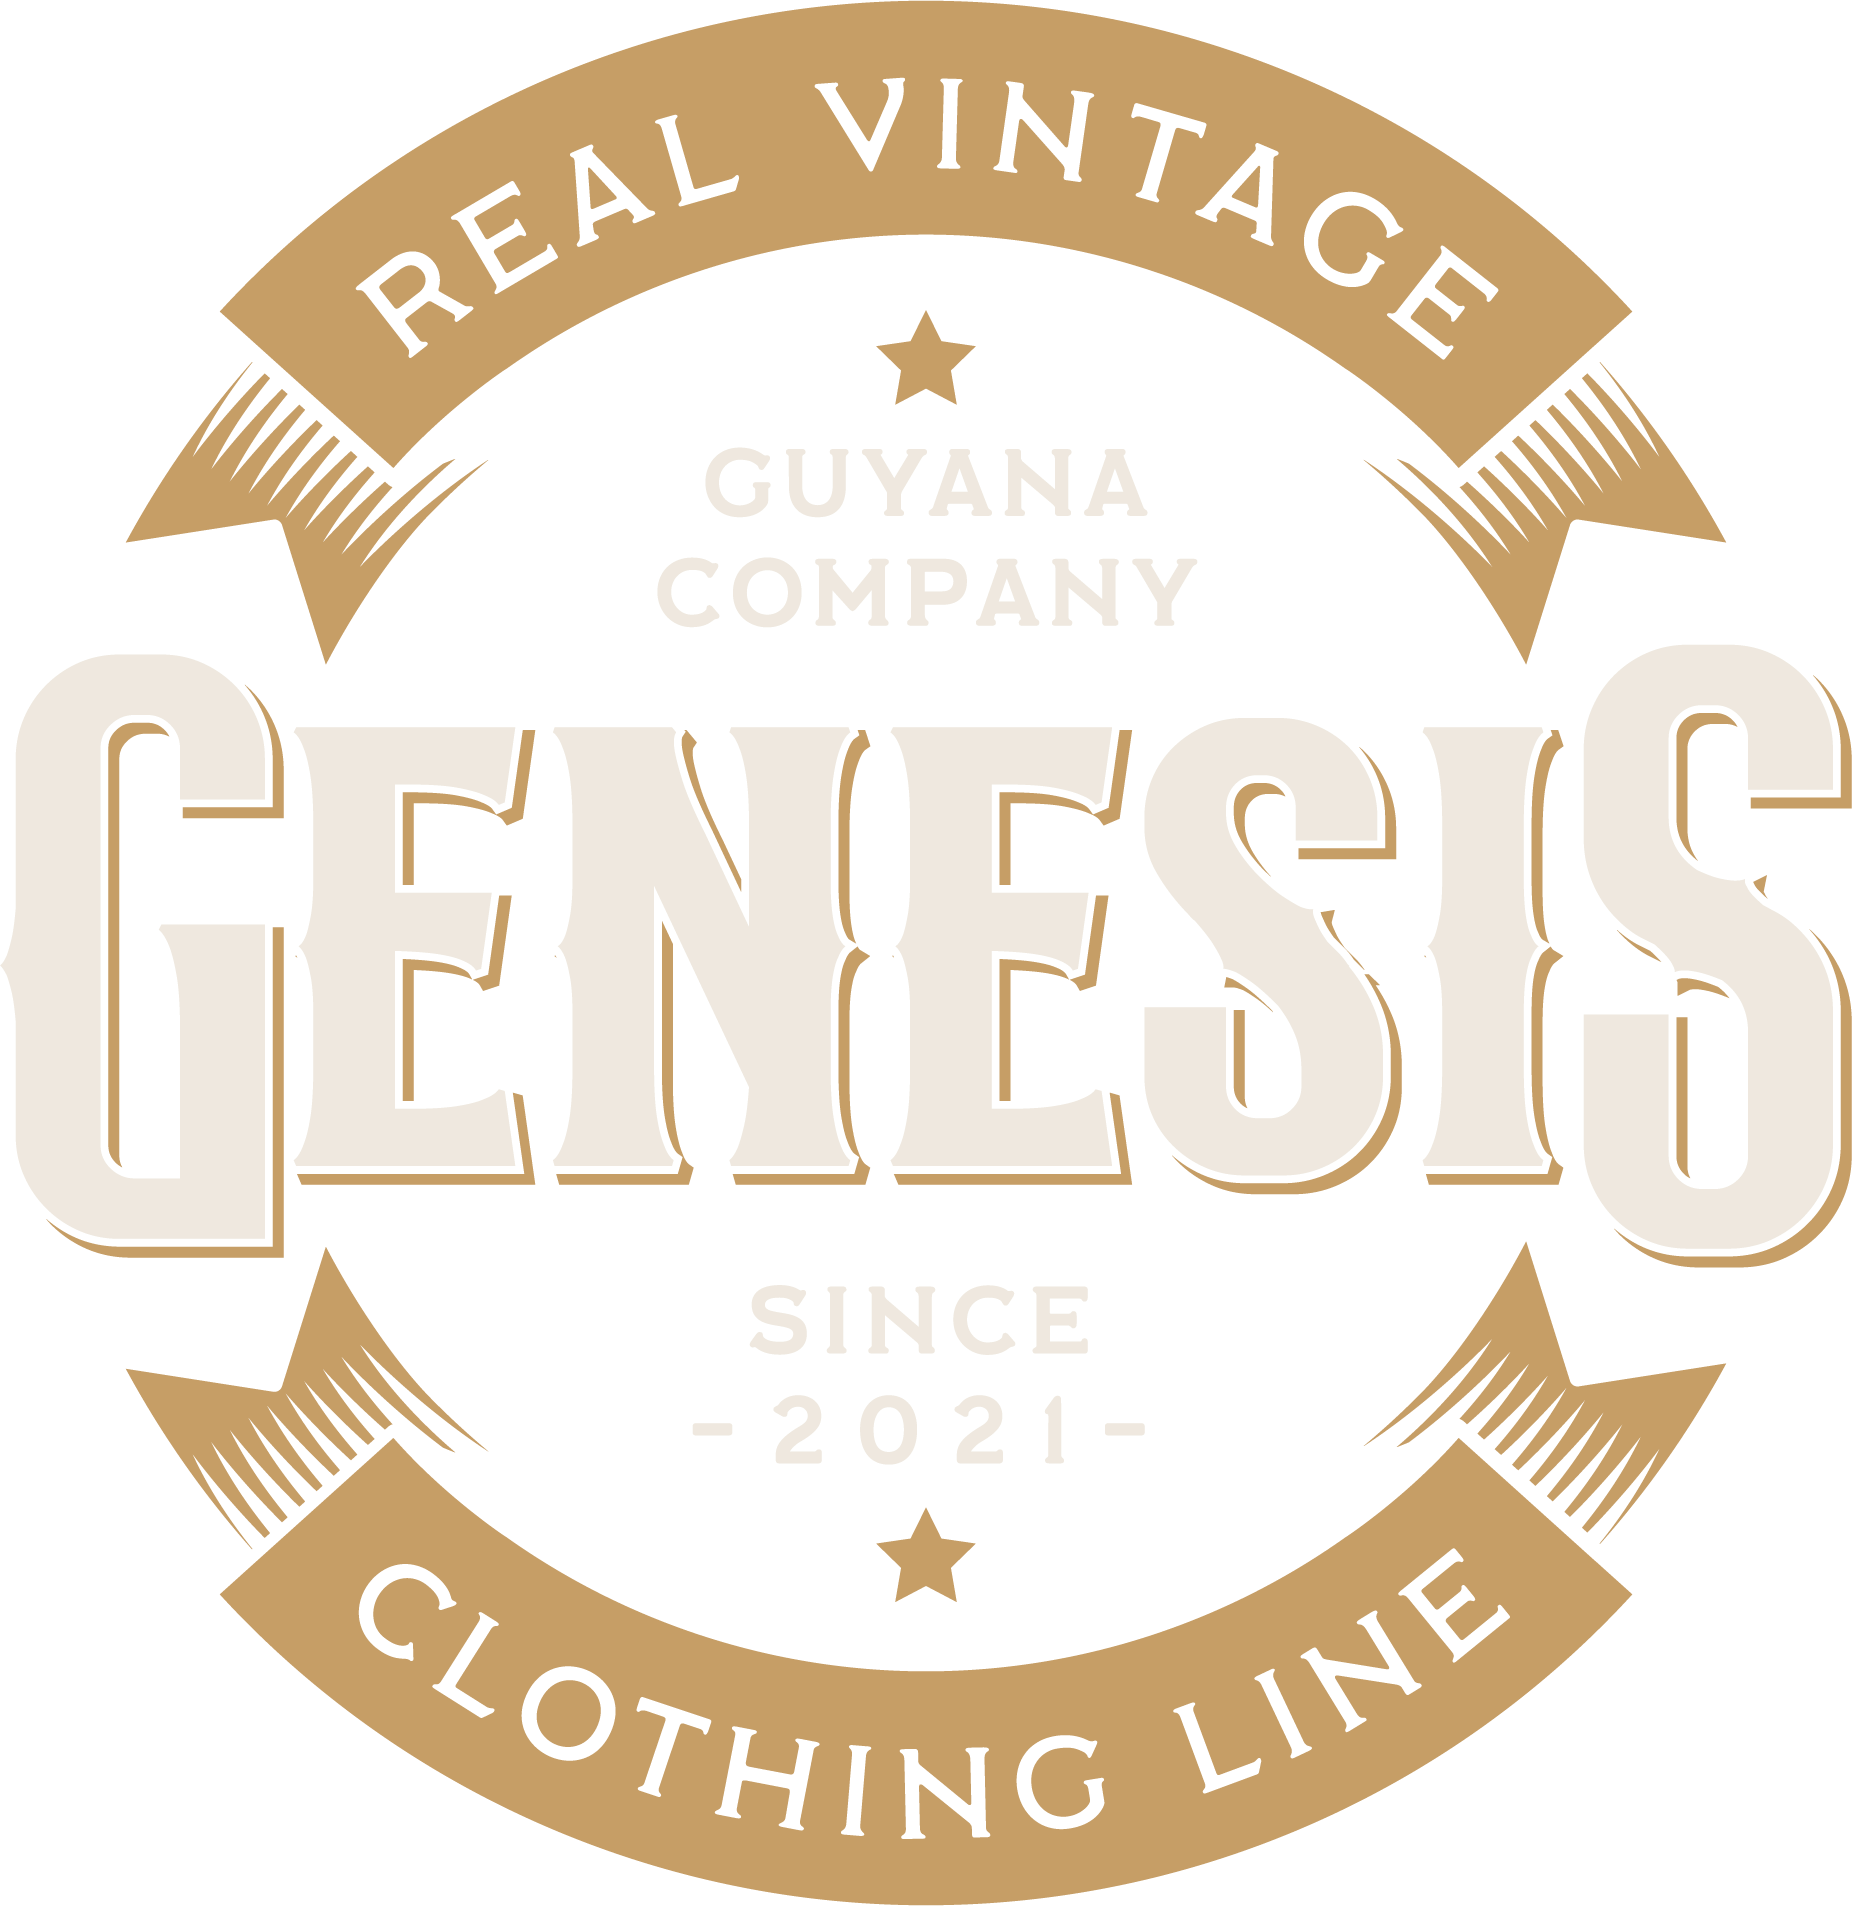 Genesis Clothing Line wholesale products